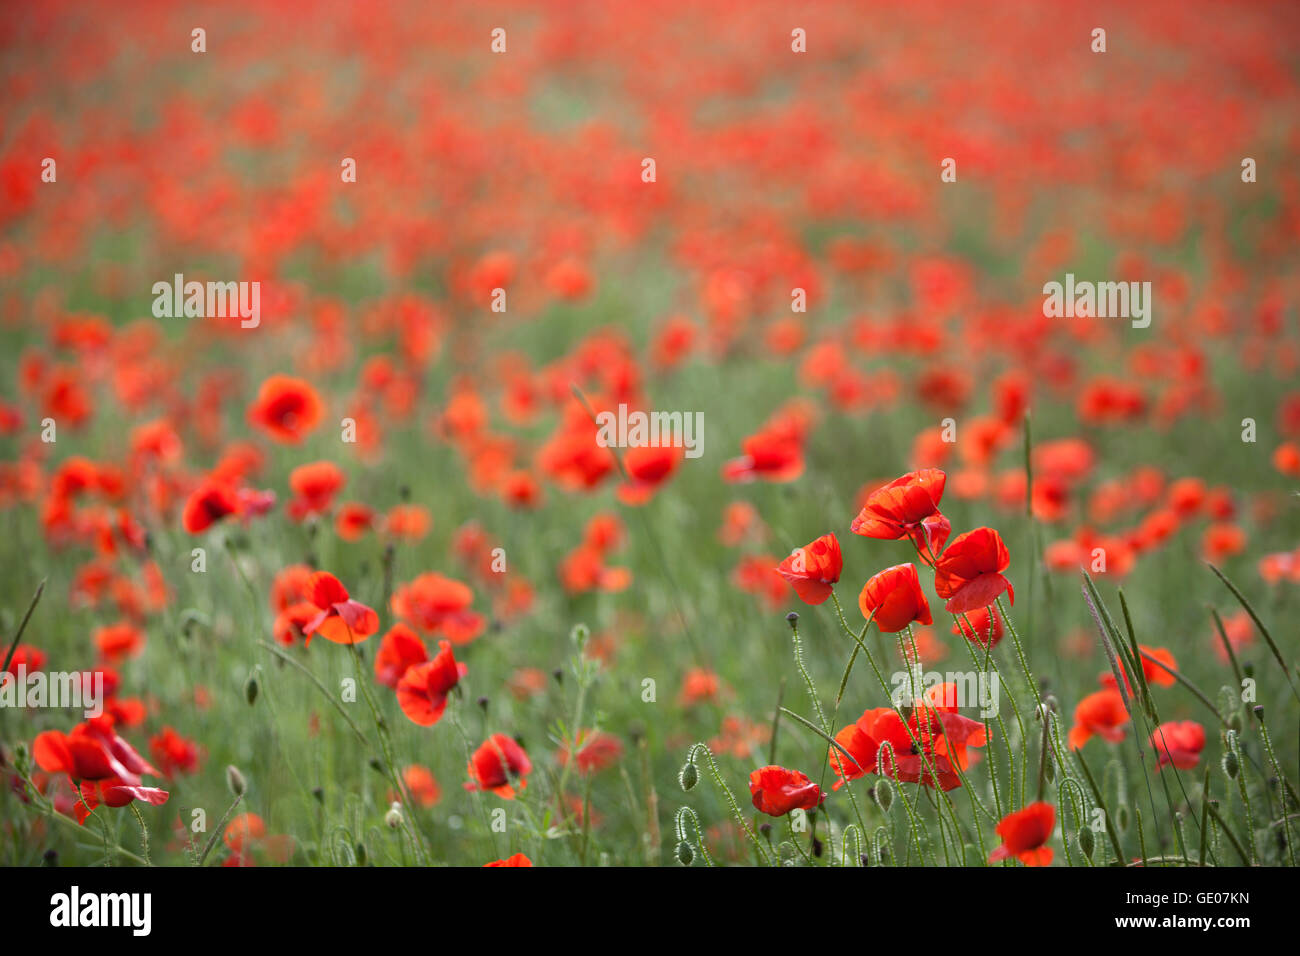 Field of red poppies, Chipping Campden, Cotswolds, Gloucestershire, England, United Kingdom, Europe Stock Photo